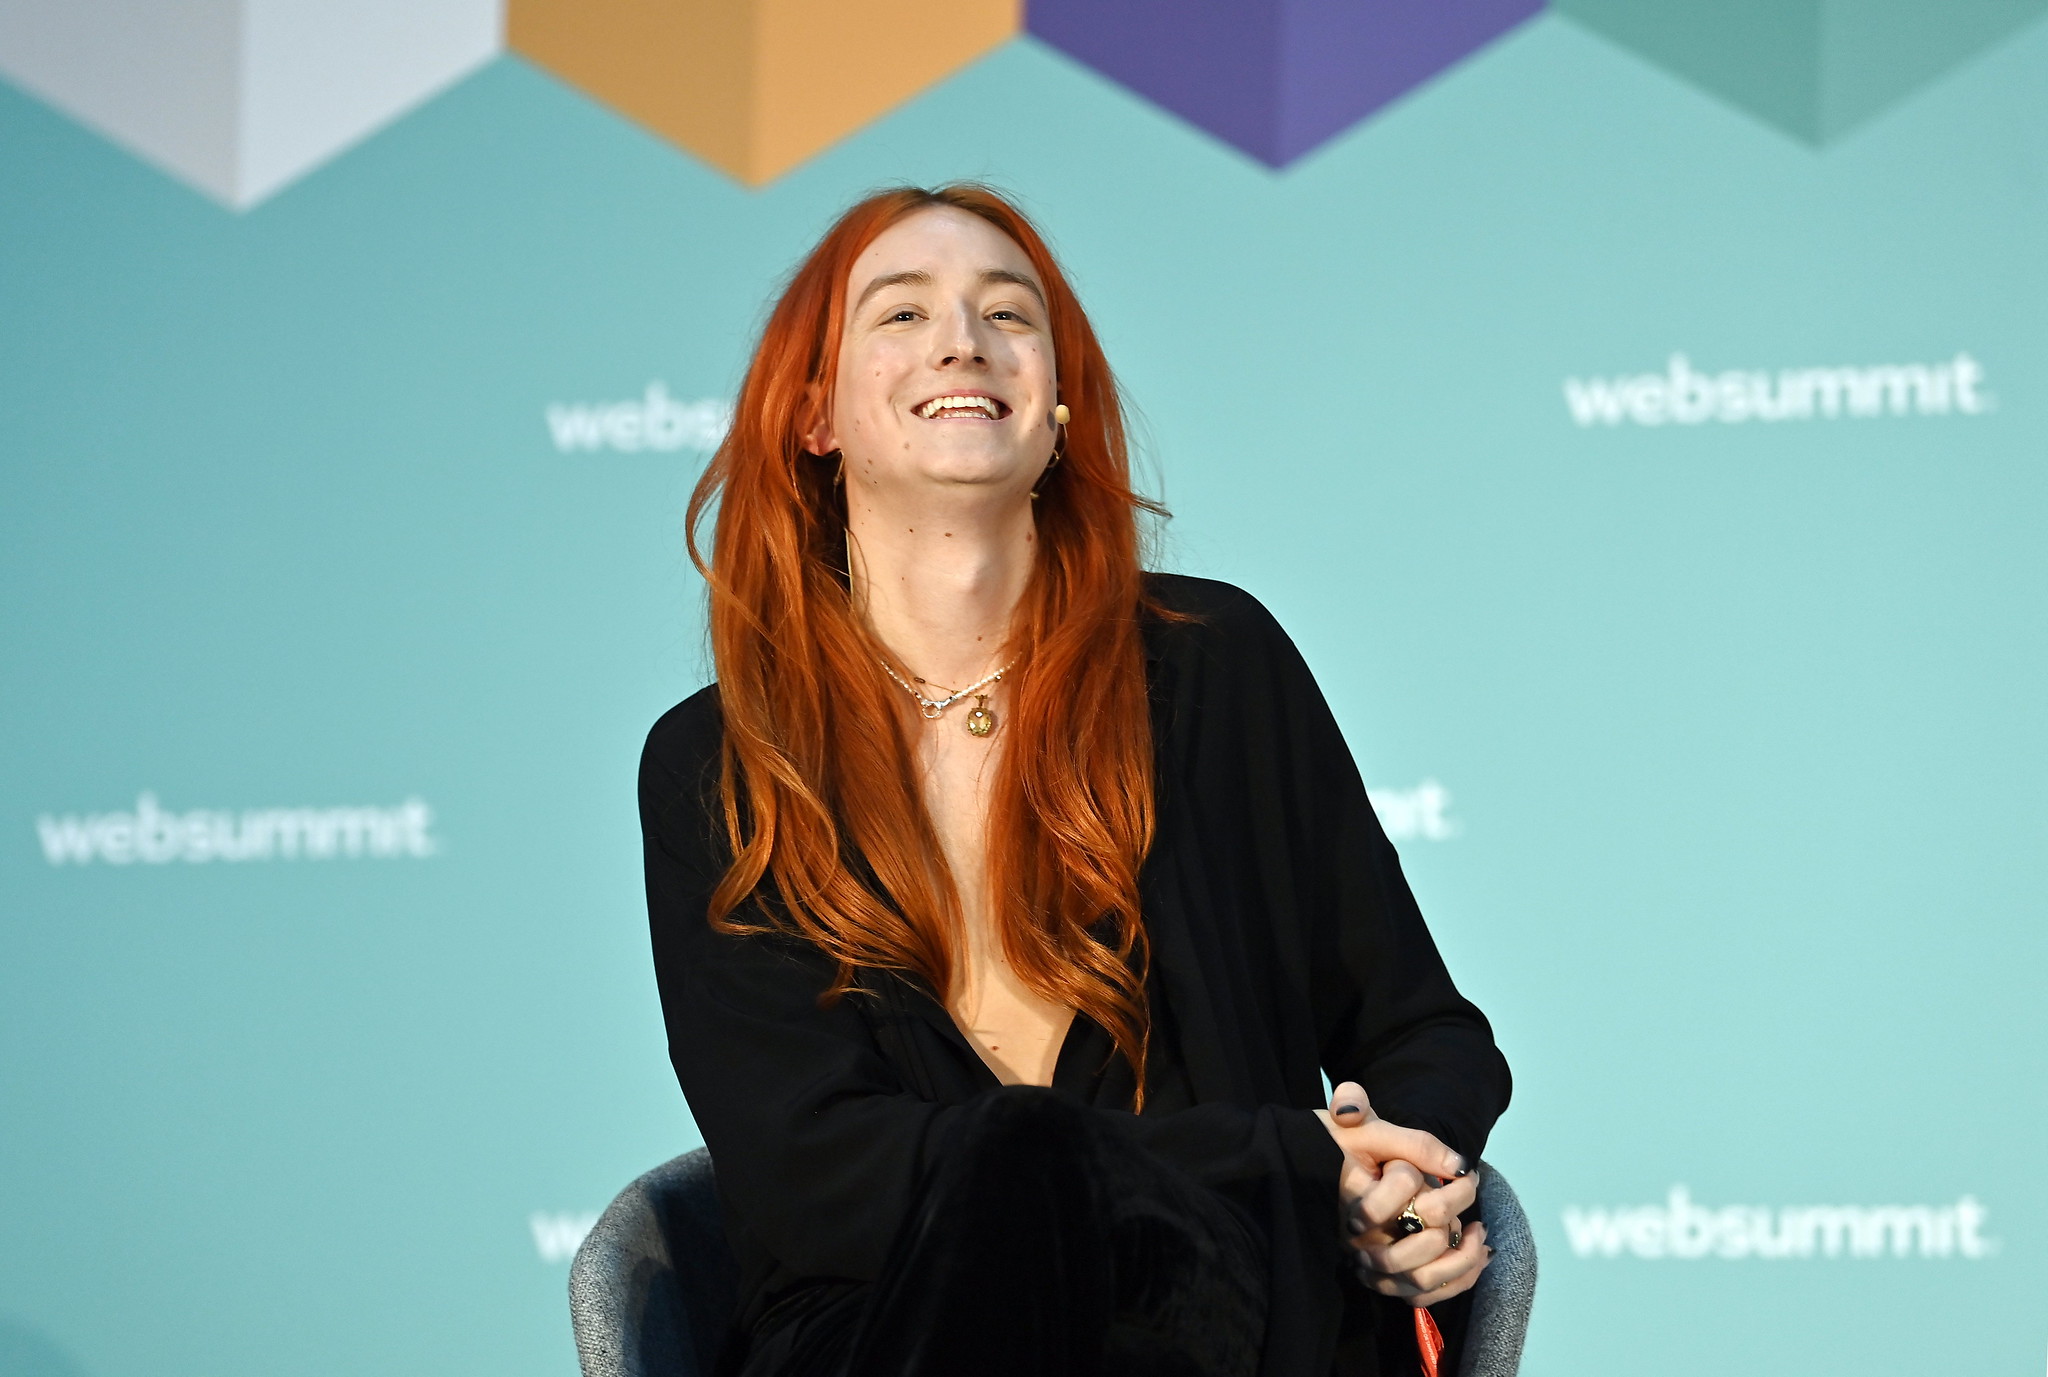 A photograph of a person (Harris Reed, ZEO of Edelman) speaking on the Corporate Innovation Summit stage at Web Summit. The person appears to be smiling.